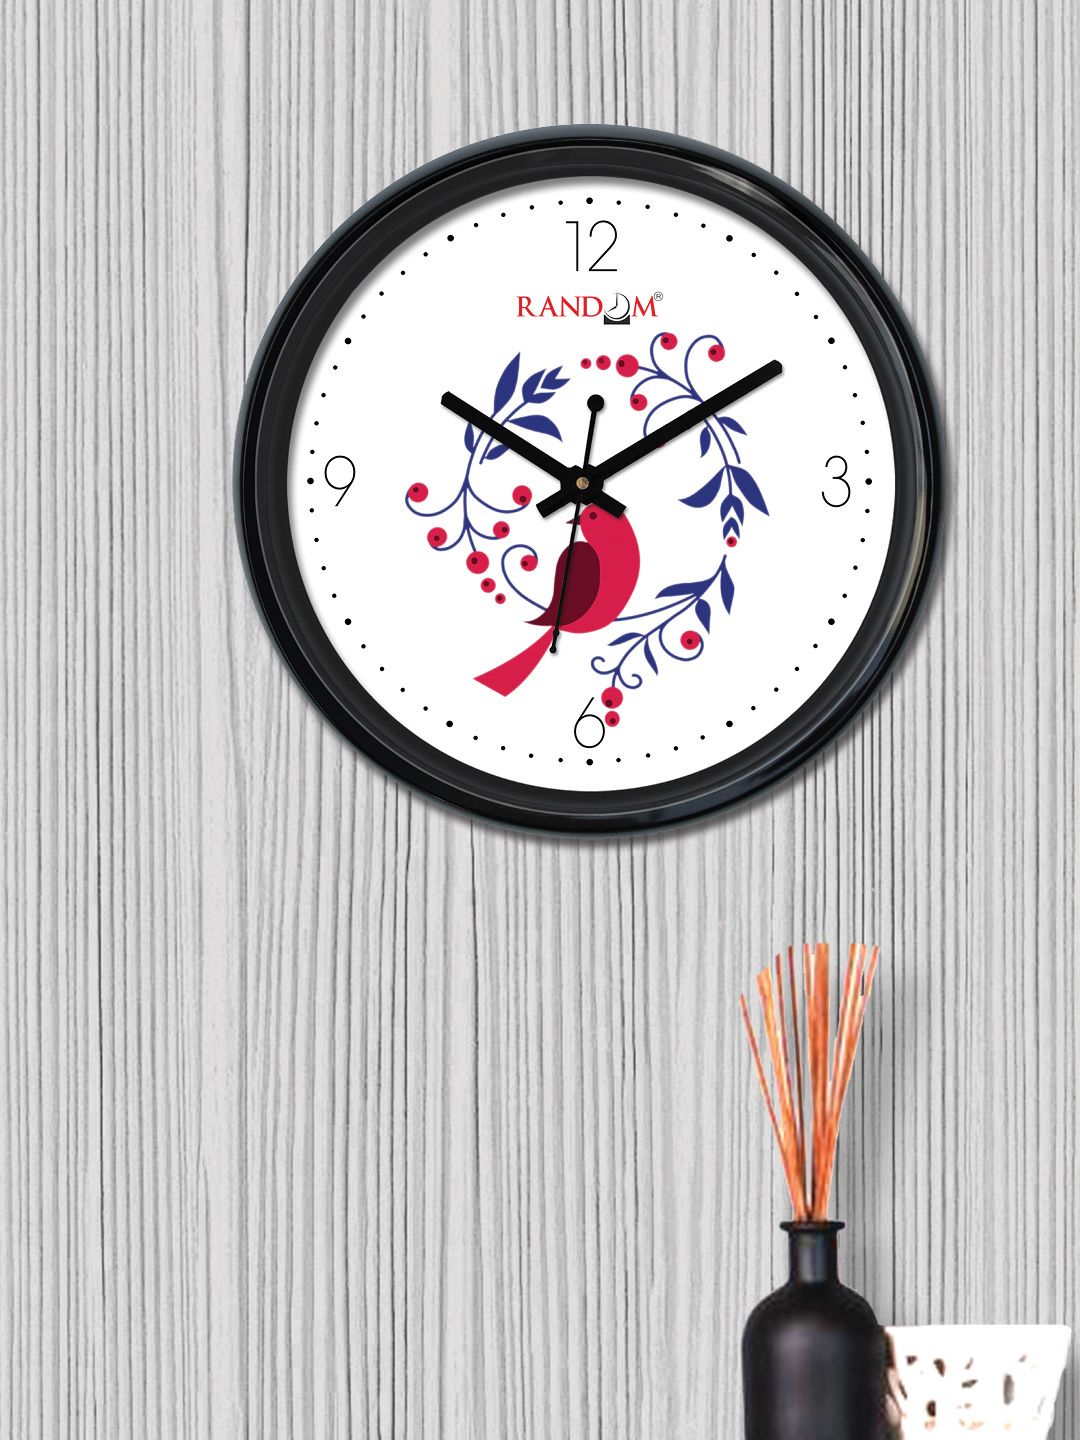 RANDOM White & Blue Round Printed 30cm Analogue Wall Clock Price in India